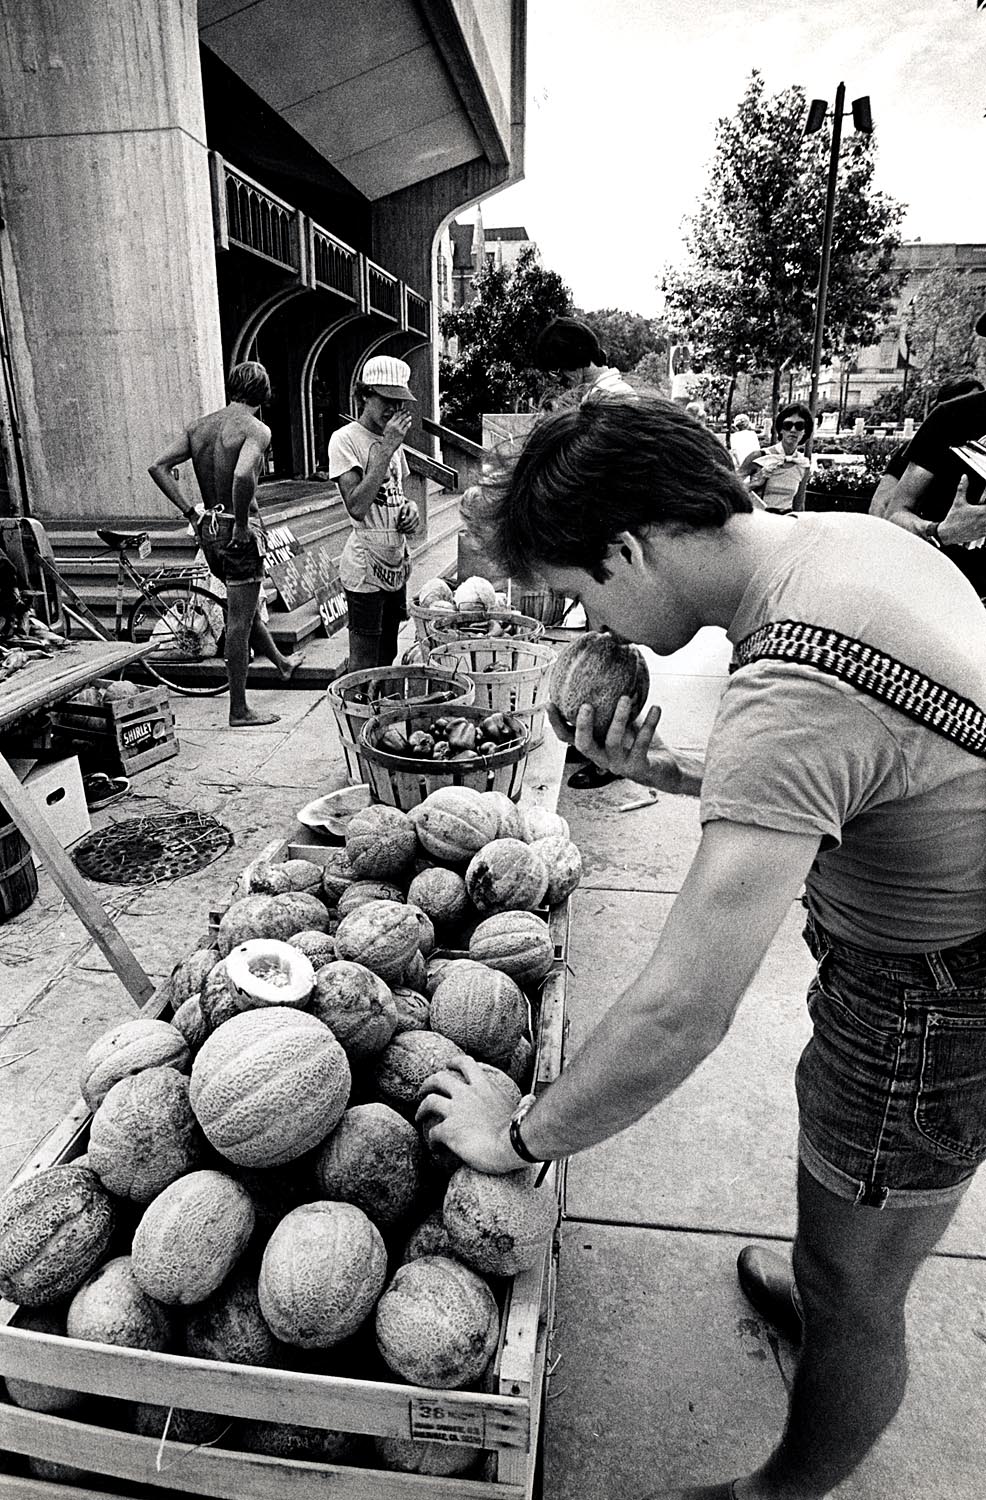 Students at farmers' market, 1970s